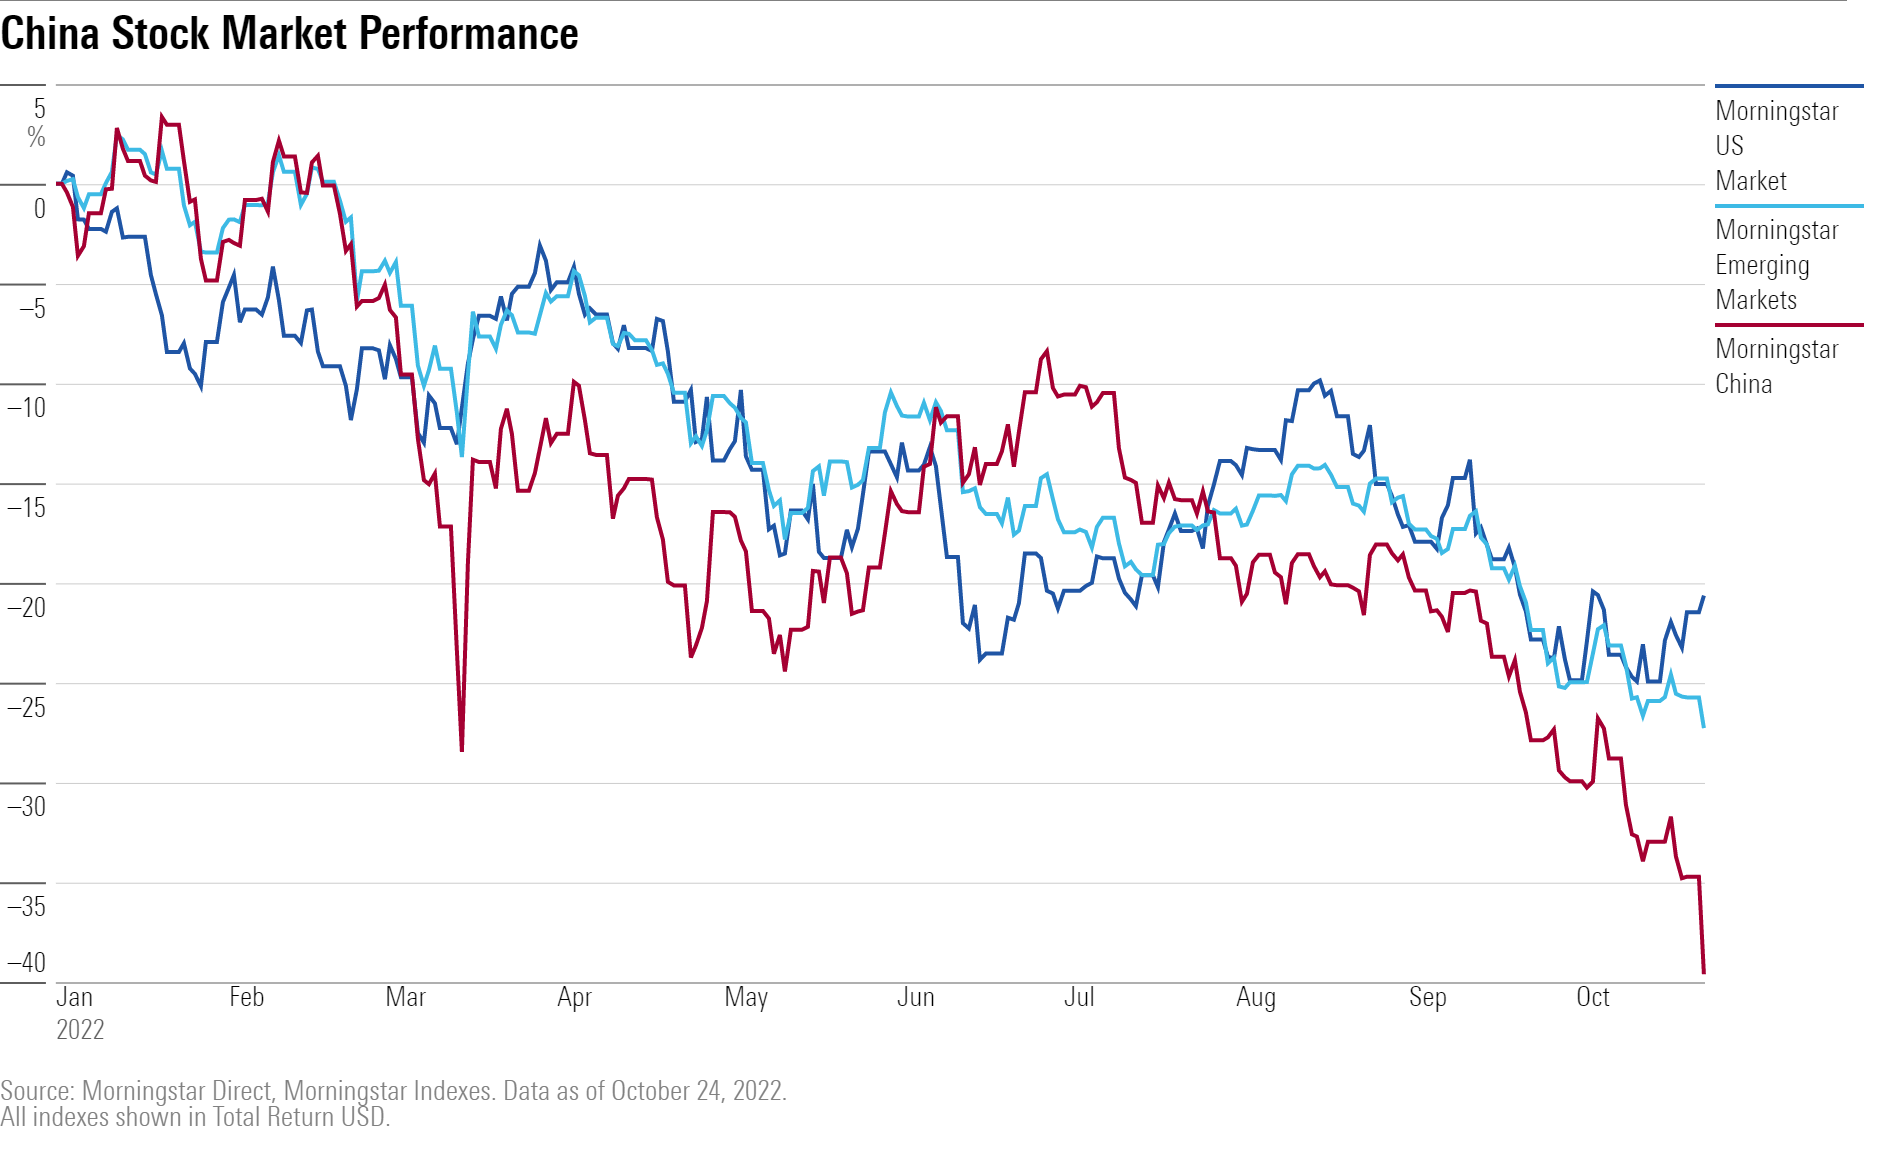 Performance of the Morningstar China index vs. the Morningstar US and Emerging Markets indexes in 2022.